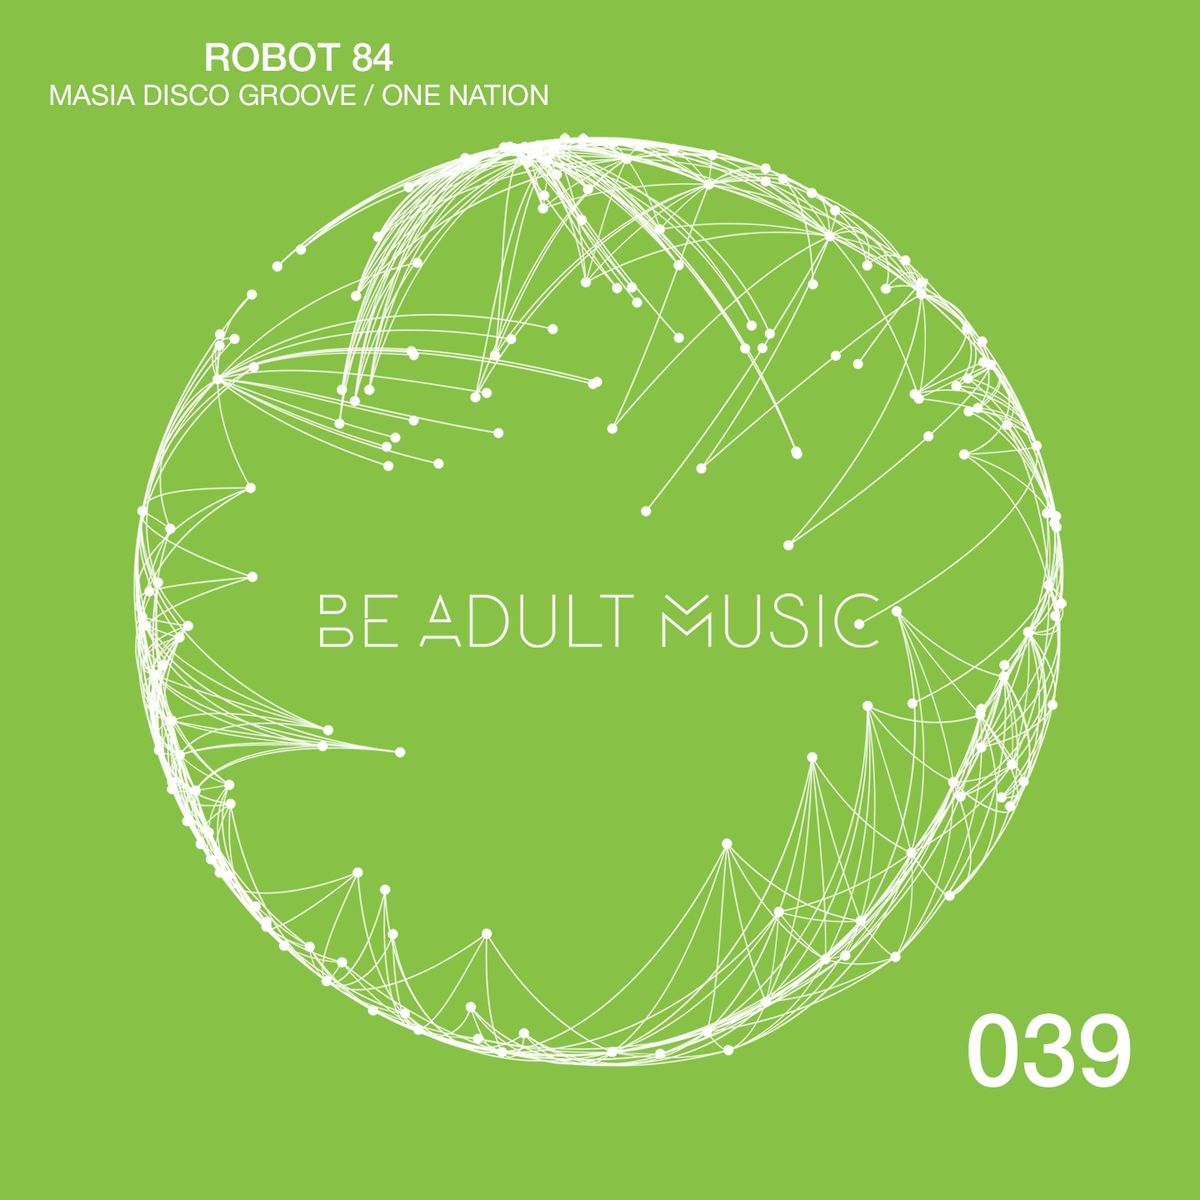 Robot 84 - Masia Disco Groove / One Nation / Be Adult Music